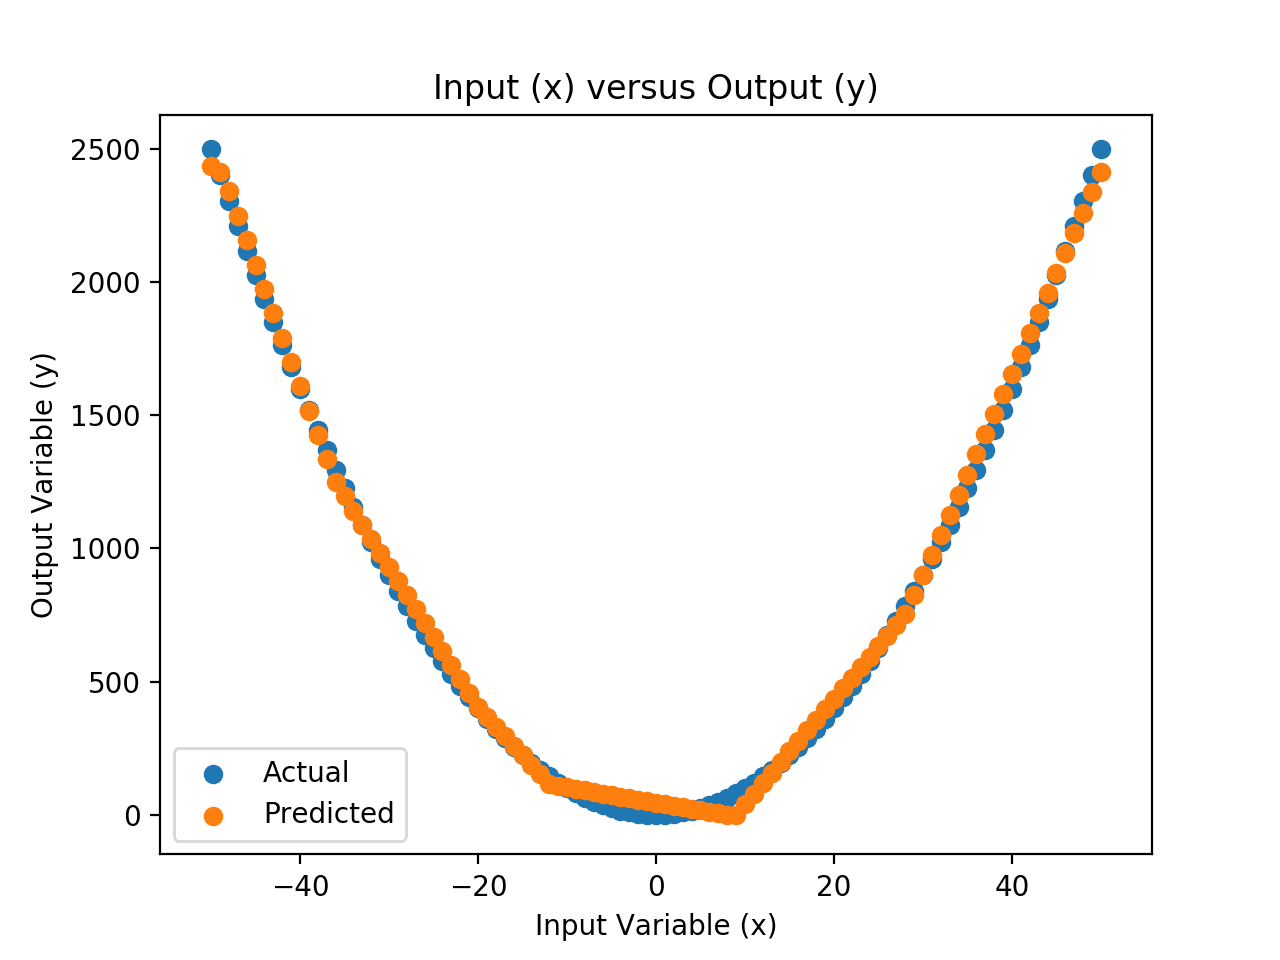 Scatter Plot of Input vs. Actual and Predicted Values for the Neural Net Approximation